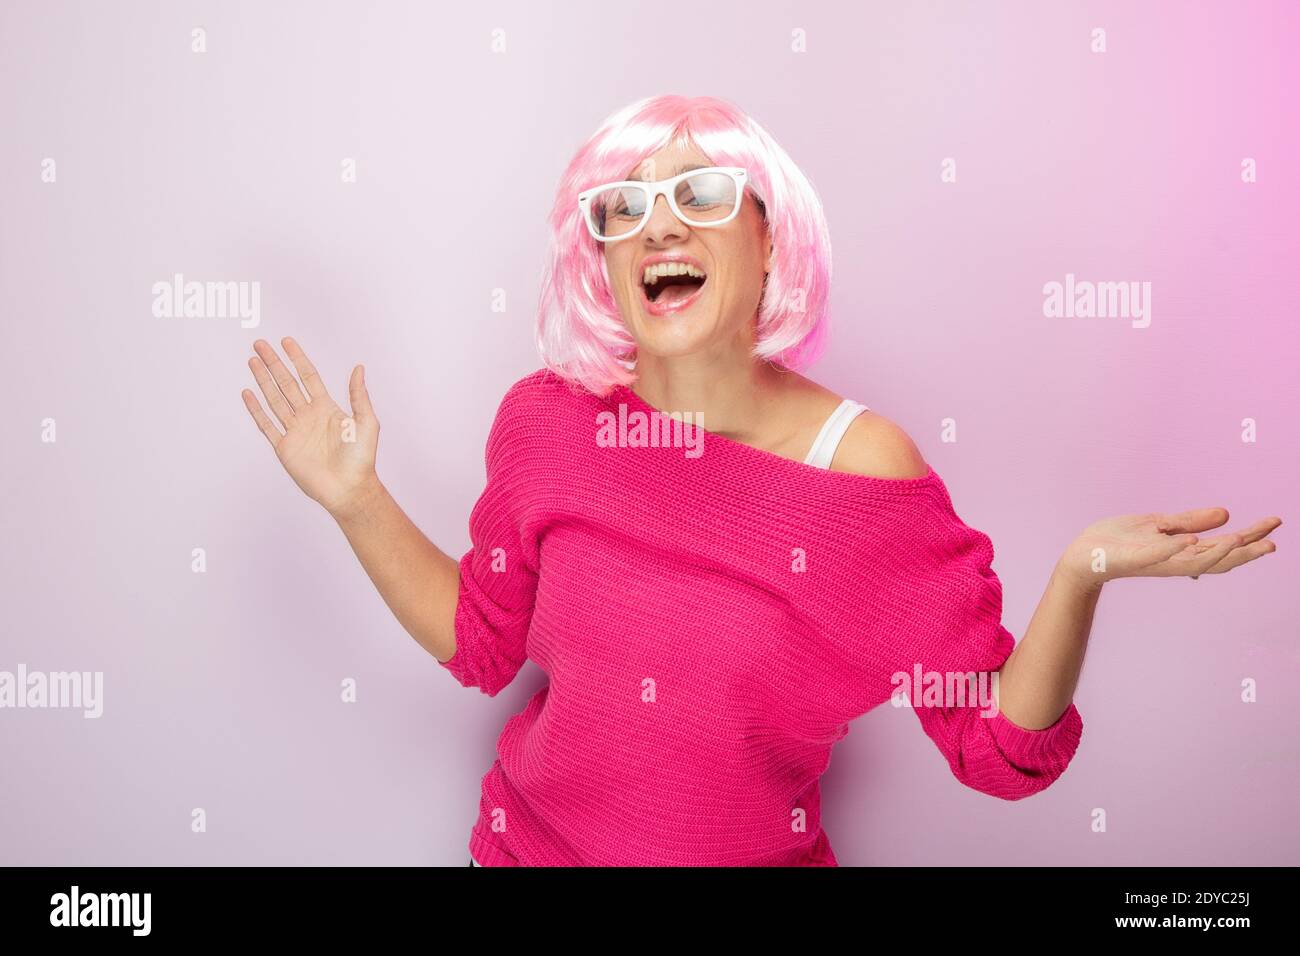 Caucasian woman with pink wig and sweater, wearing white glasses, posing funny at the photo studio. Funny expressive women and colorful portrait conce Stock Photo